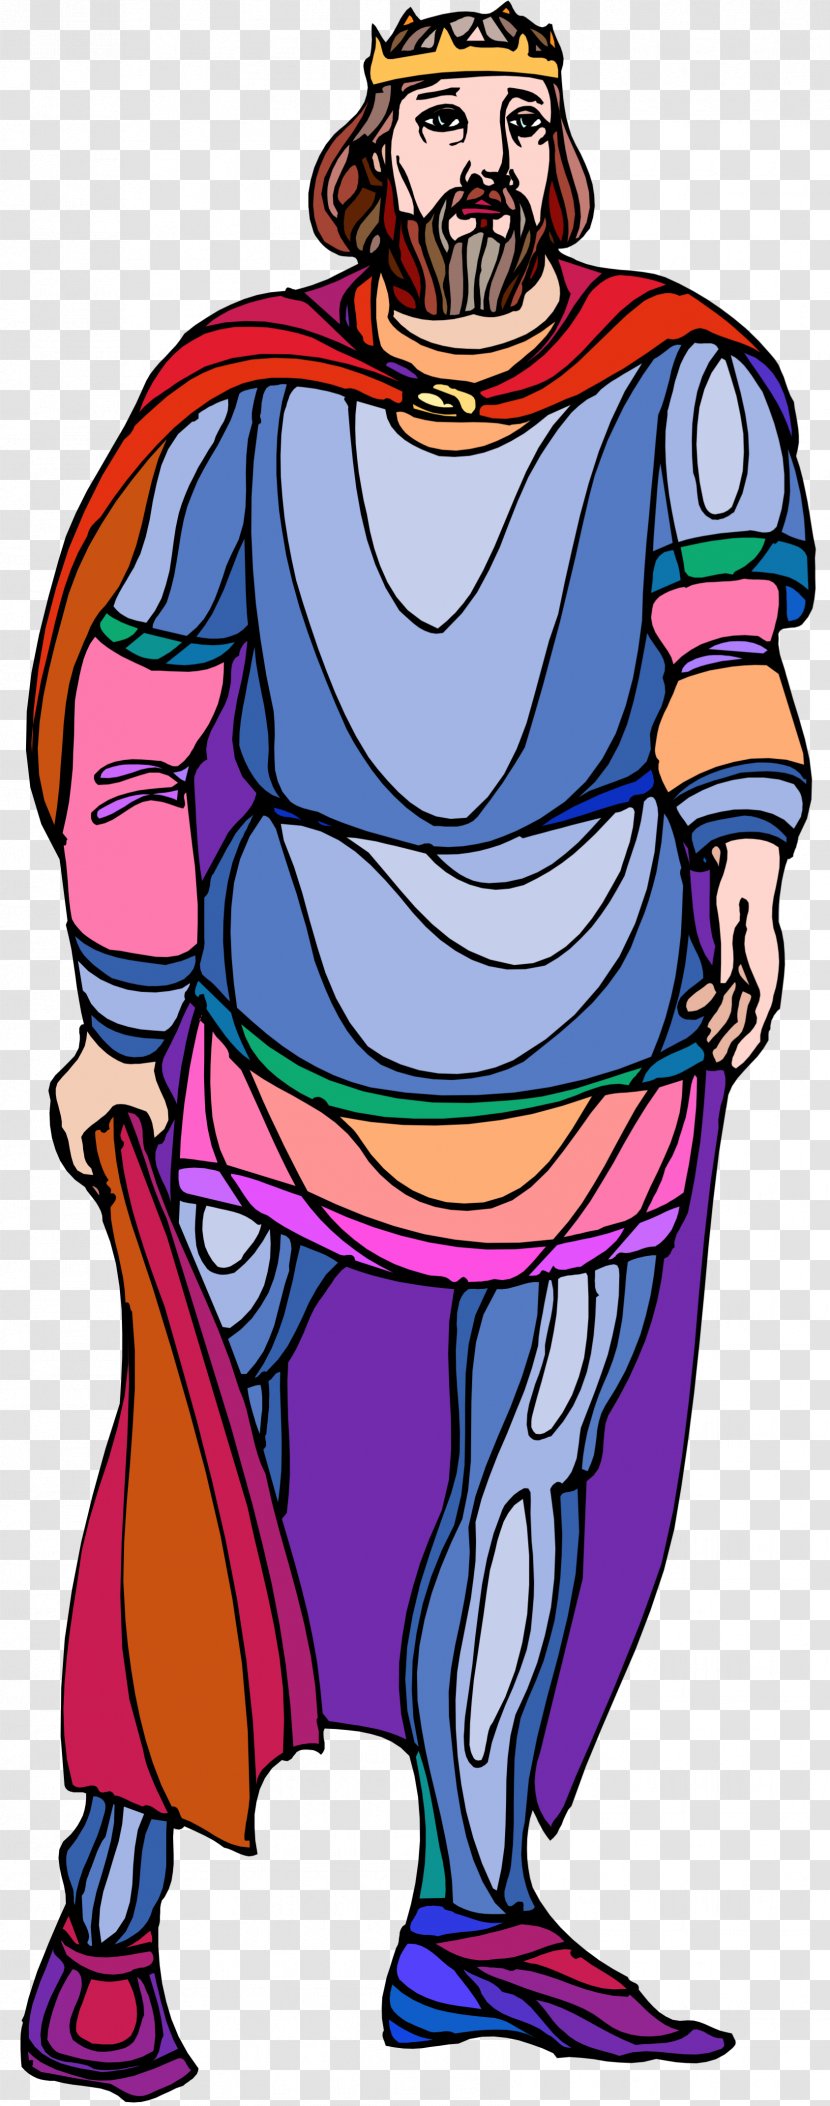 King Duncan Lady Macbeth William Shakespeare Hamlet - Clipart Transparent PNG